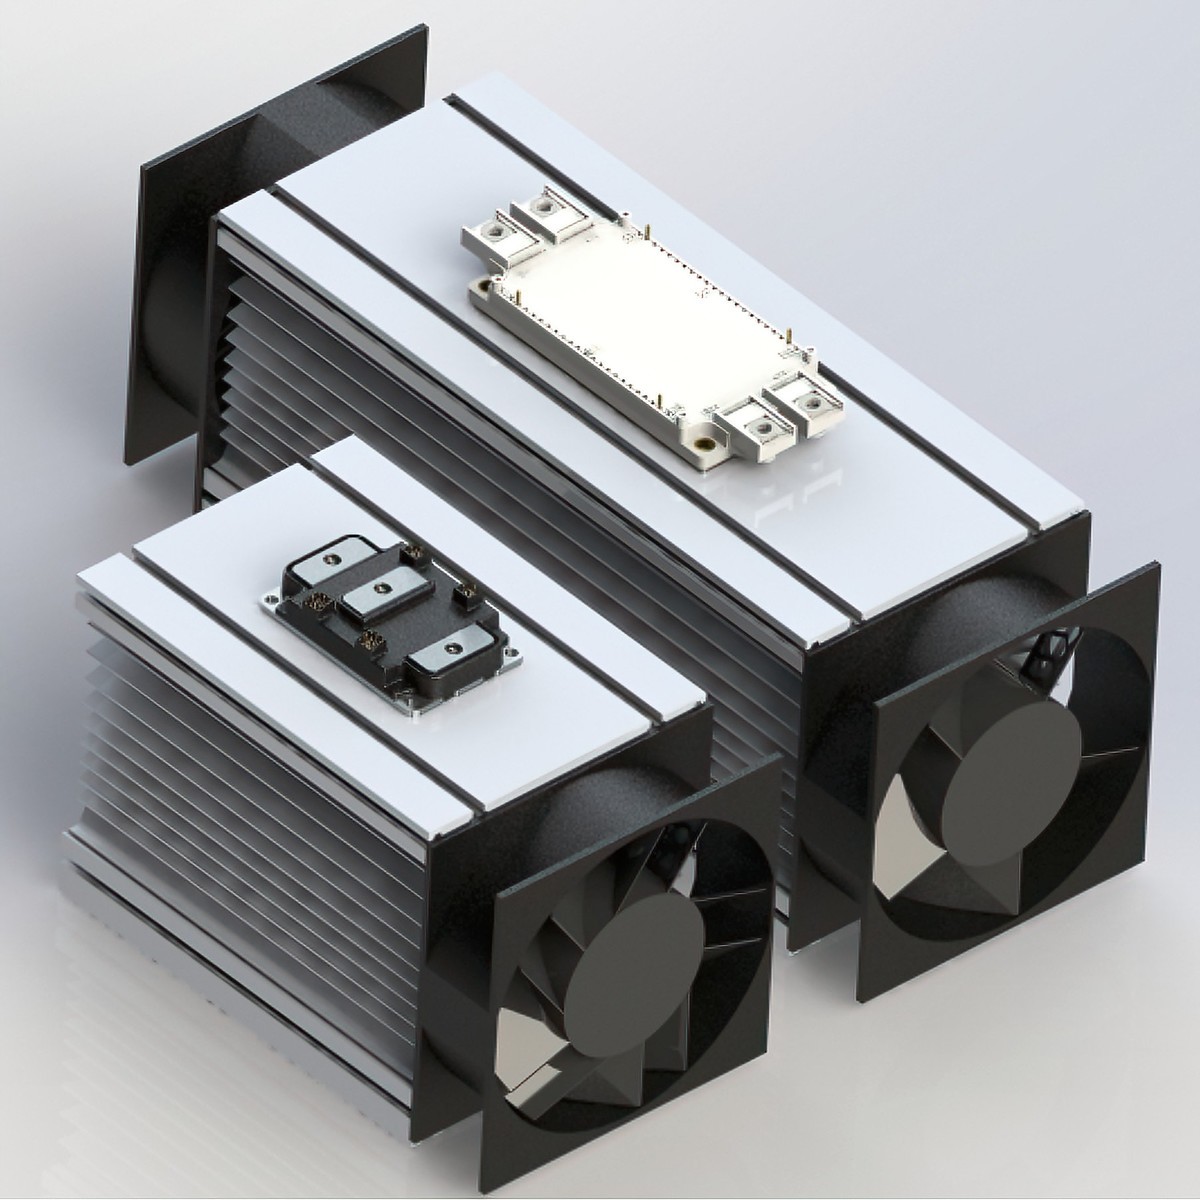 Photograph showing how Wolfspeed's XM3 power module requires a smaller heatsink and only one fan, compared to a EconoDUAL® module.